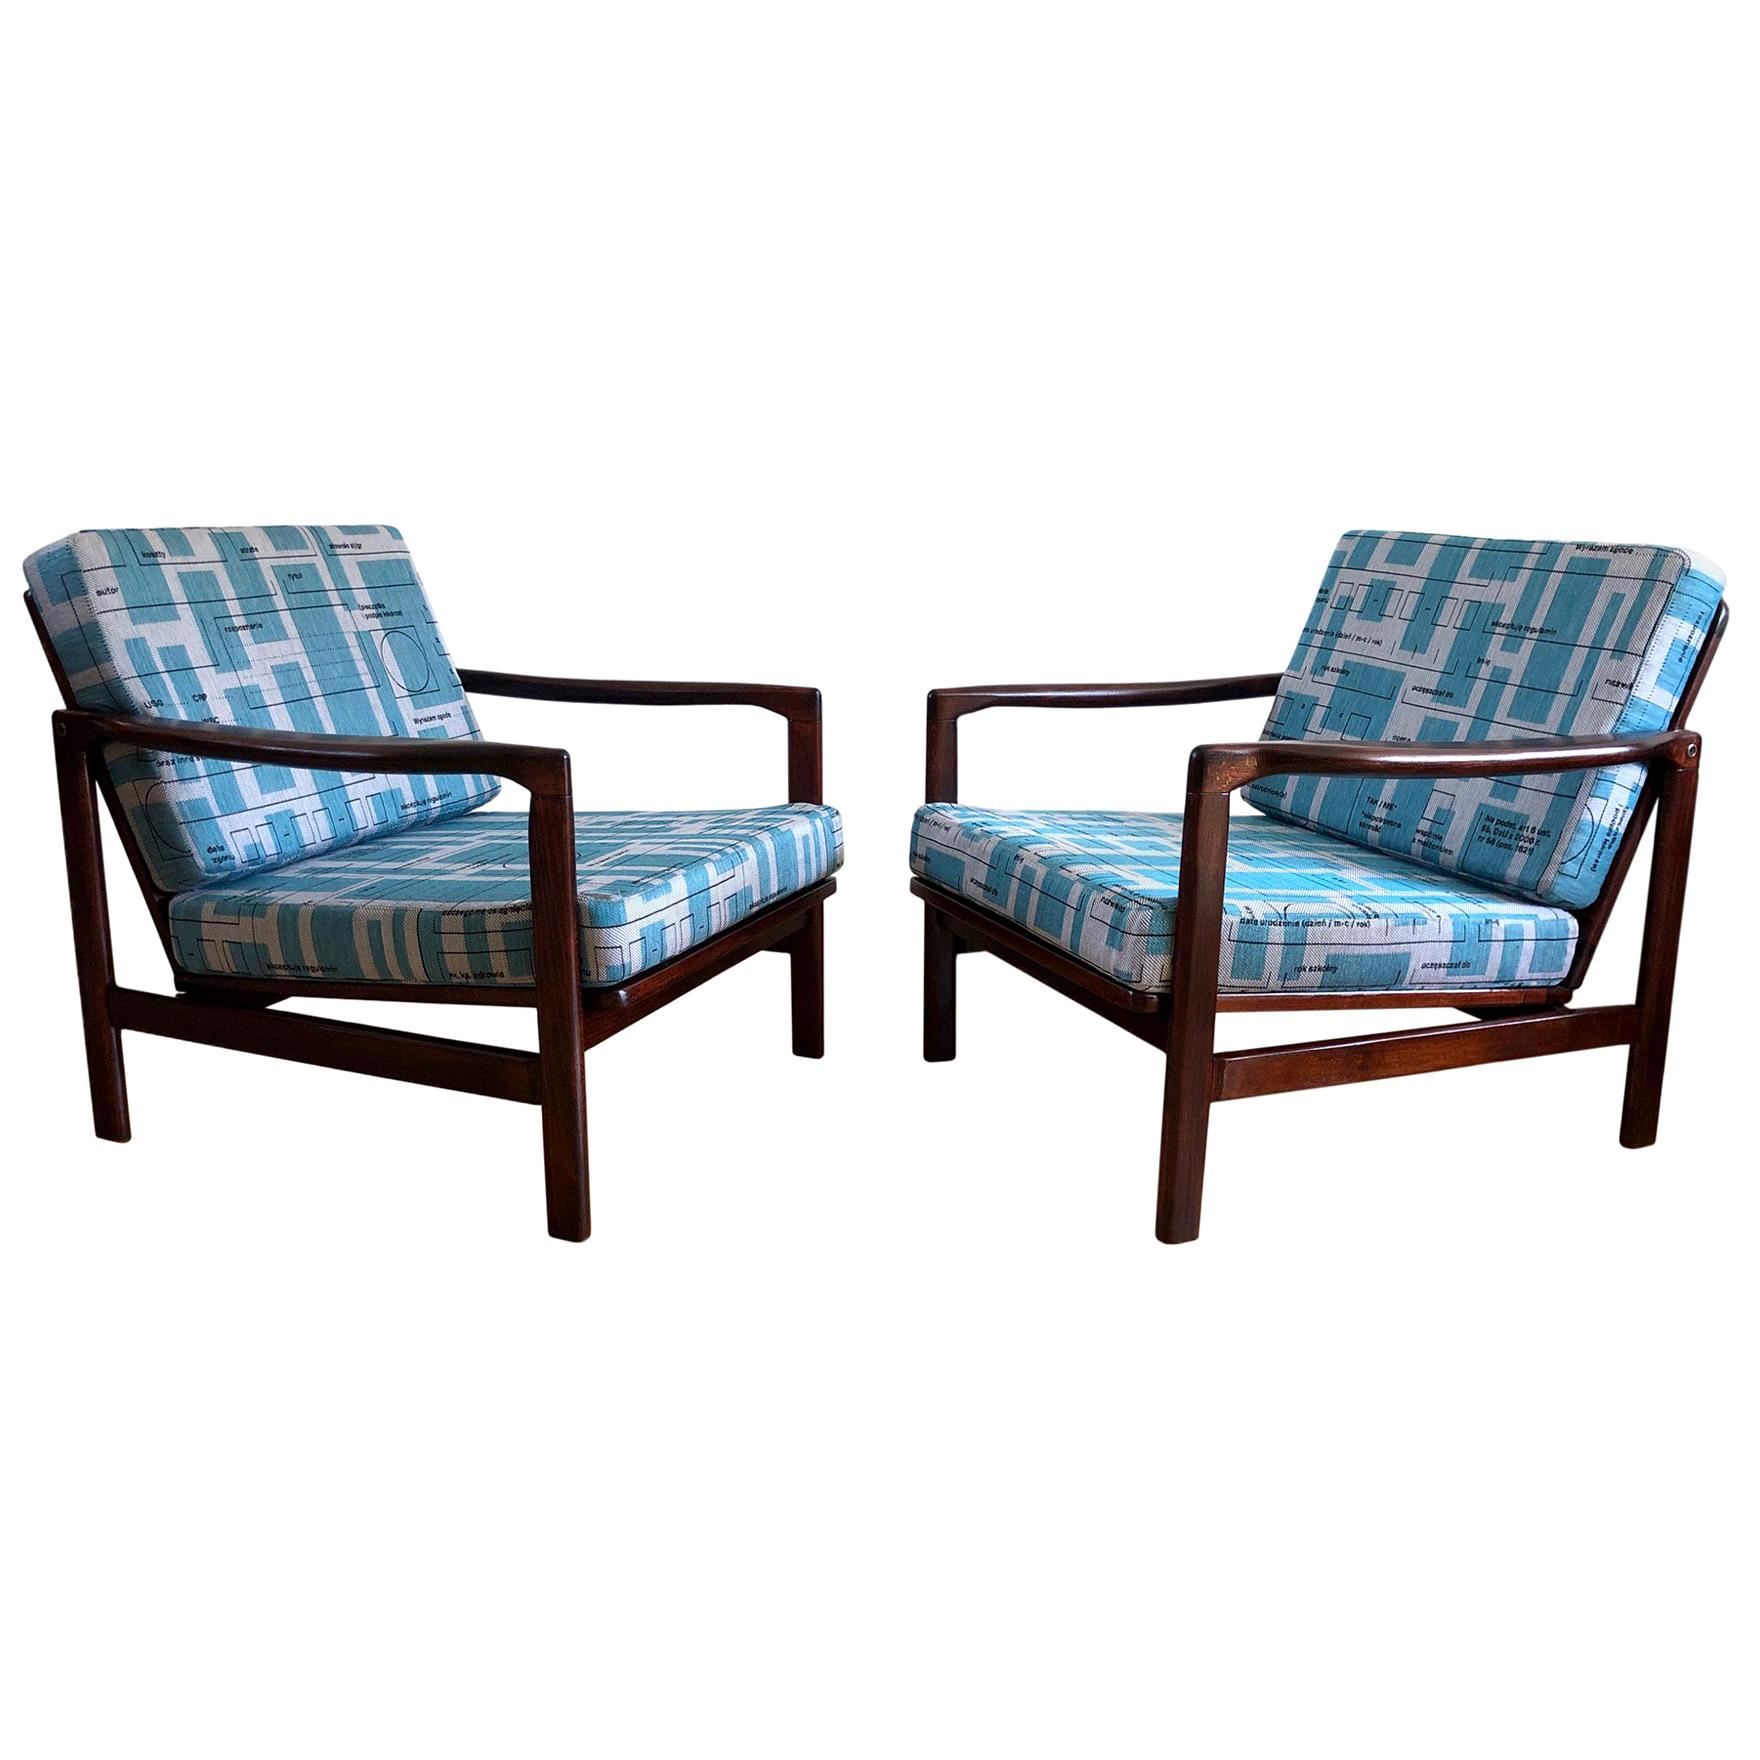 Midcentury Lounge Armchairs Set in Blue Jacquard, Zenon Bączyk, 1960s For Sale